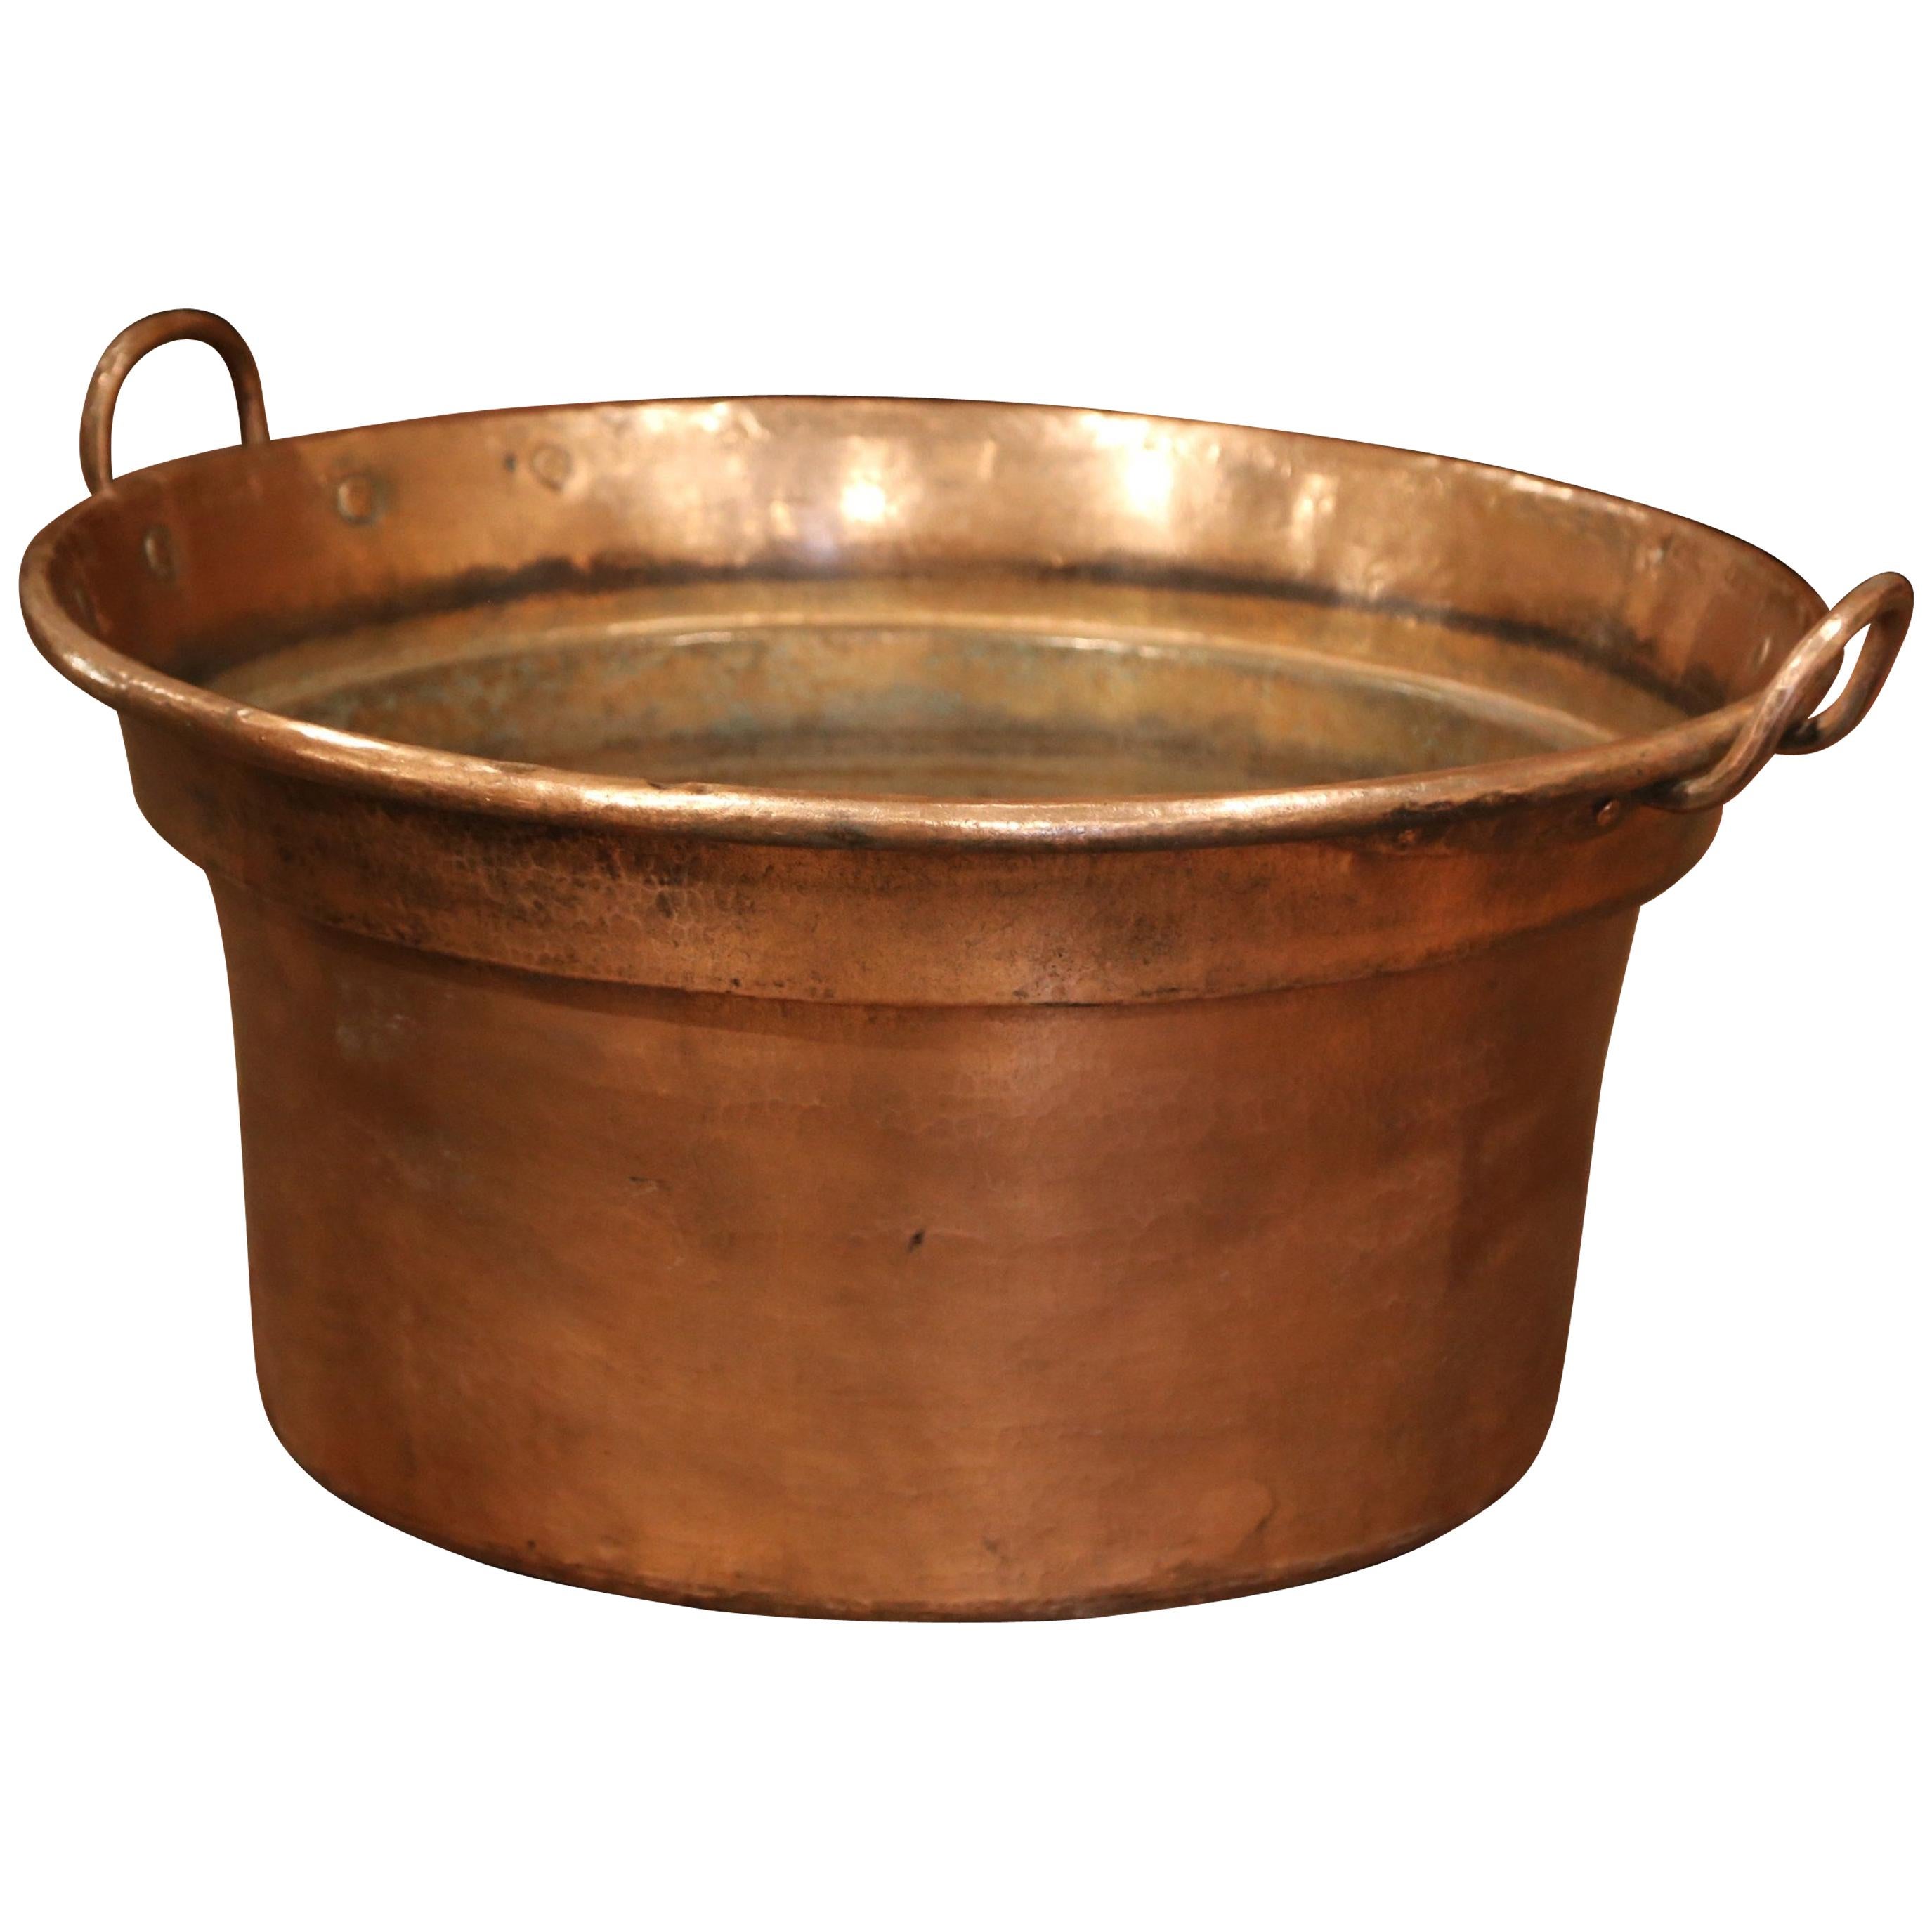 Mid-19th Century French Copper and Brass Jelly Boiling Bowl from Normandy